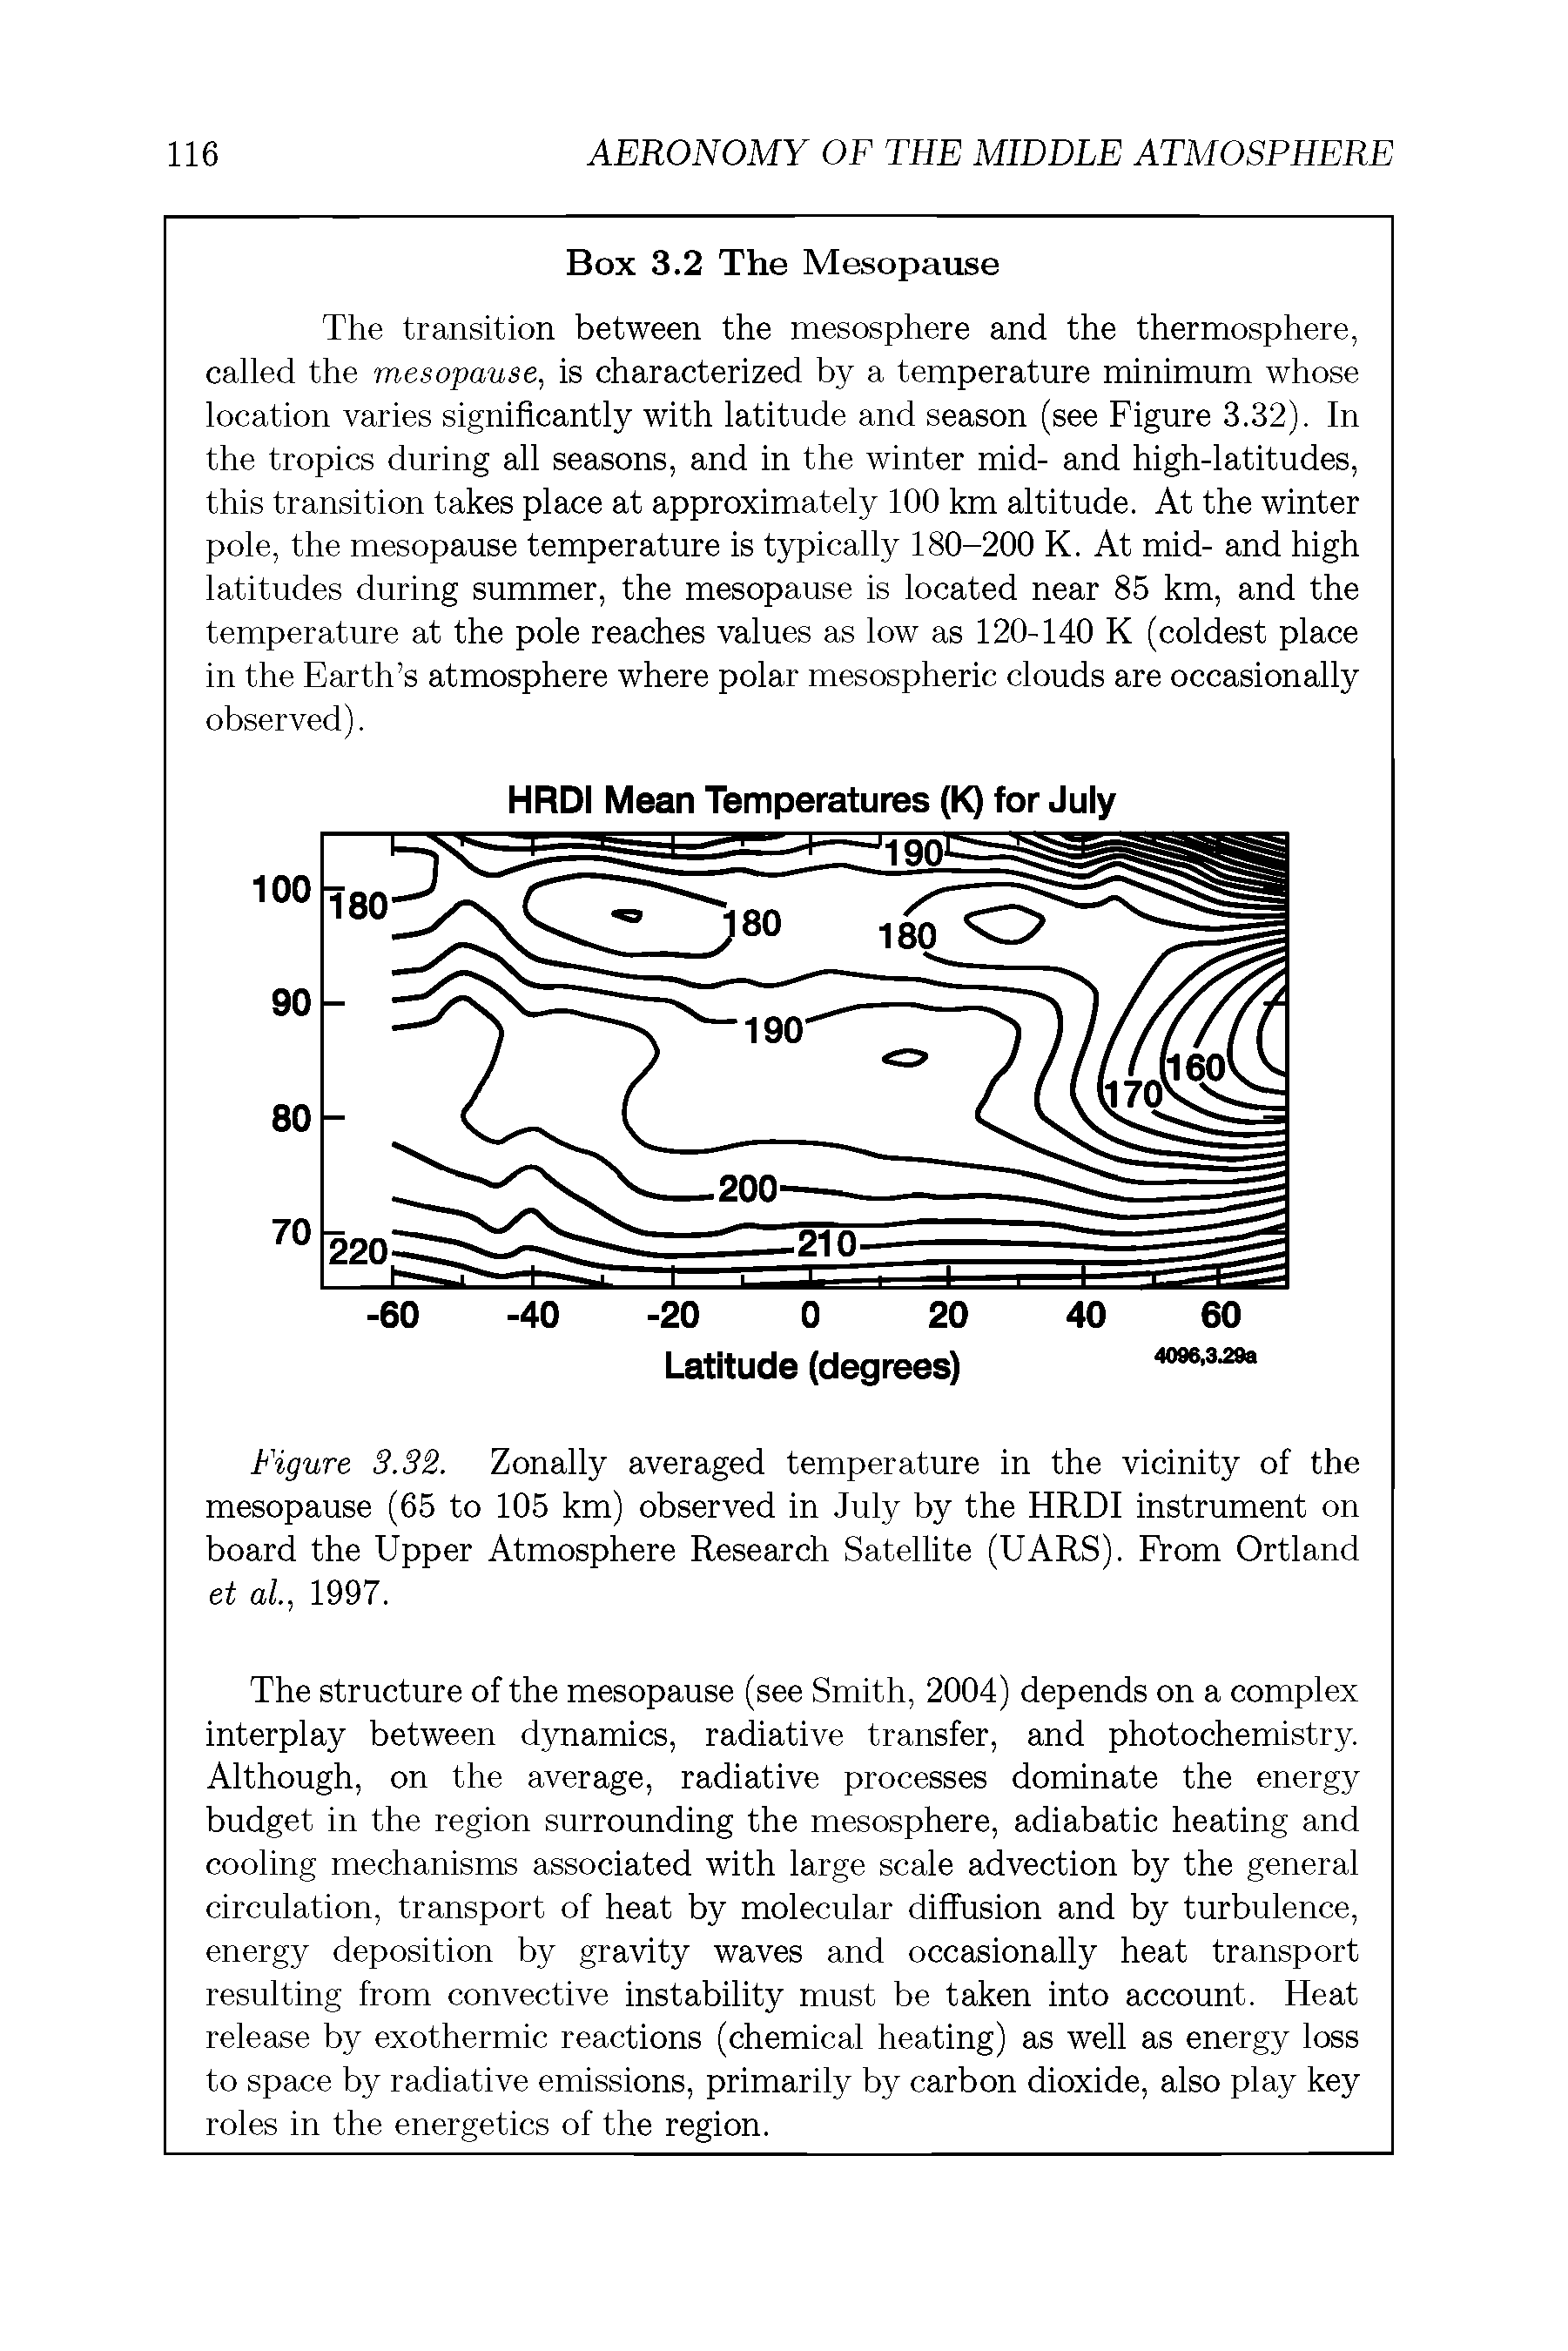 Figure 3.32. Zonally averaged temperature in the vicinity of the mesopause (65 to 105 km) observed in July by the HRDI instrument on board the Upper Atmosphere Research Satellite (UARS). From Ortland et al, 1997.